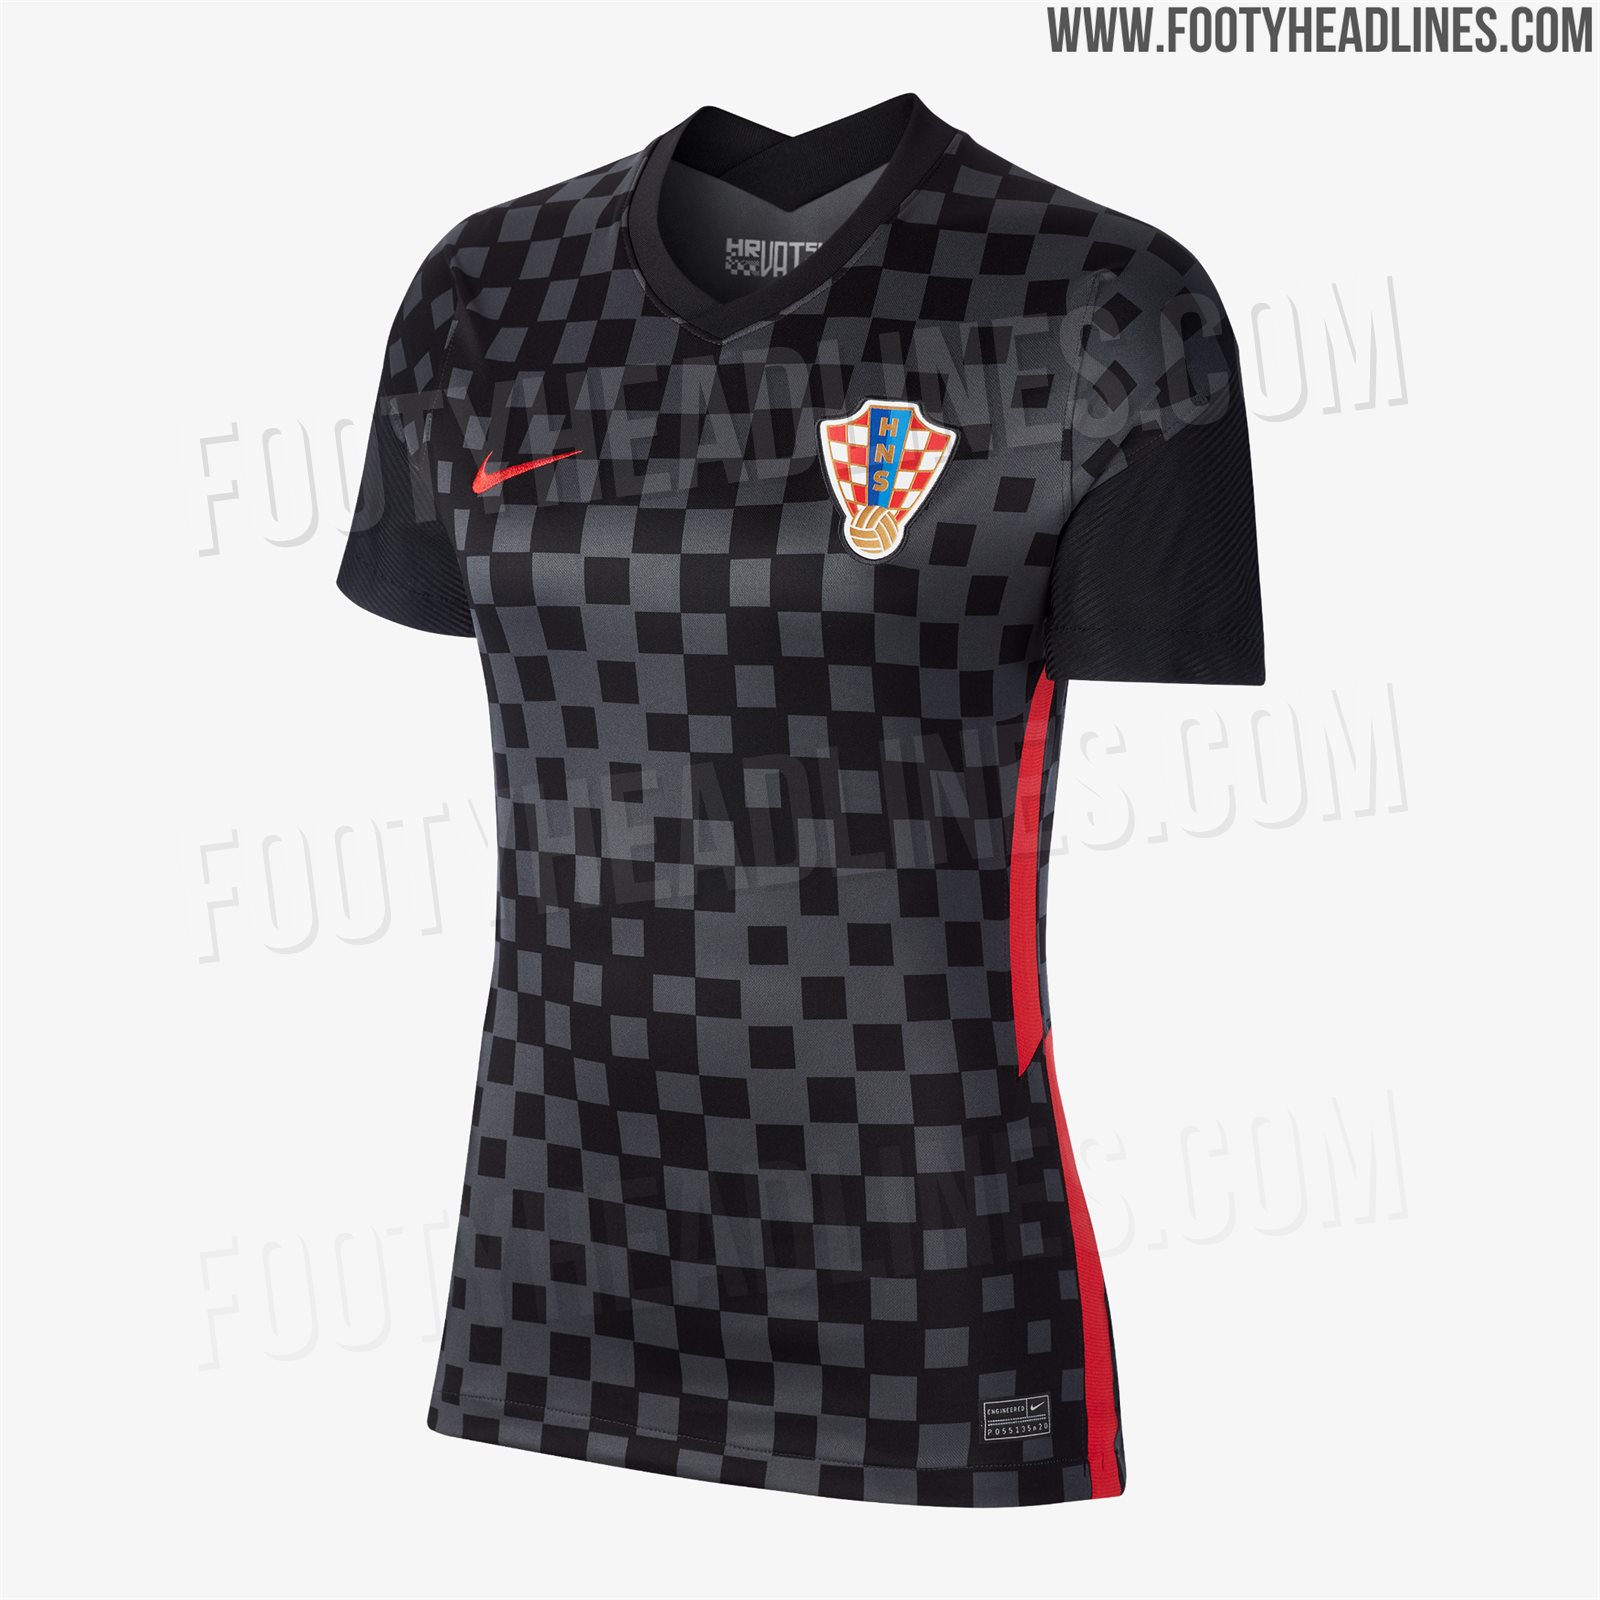 Woord Calligrapher fout All Nike 2020 National Team Kits Released: Brazil, England, France,  Netherlands, Portugal & More - Footy Headlines